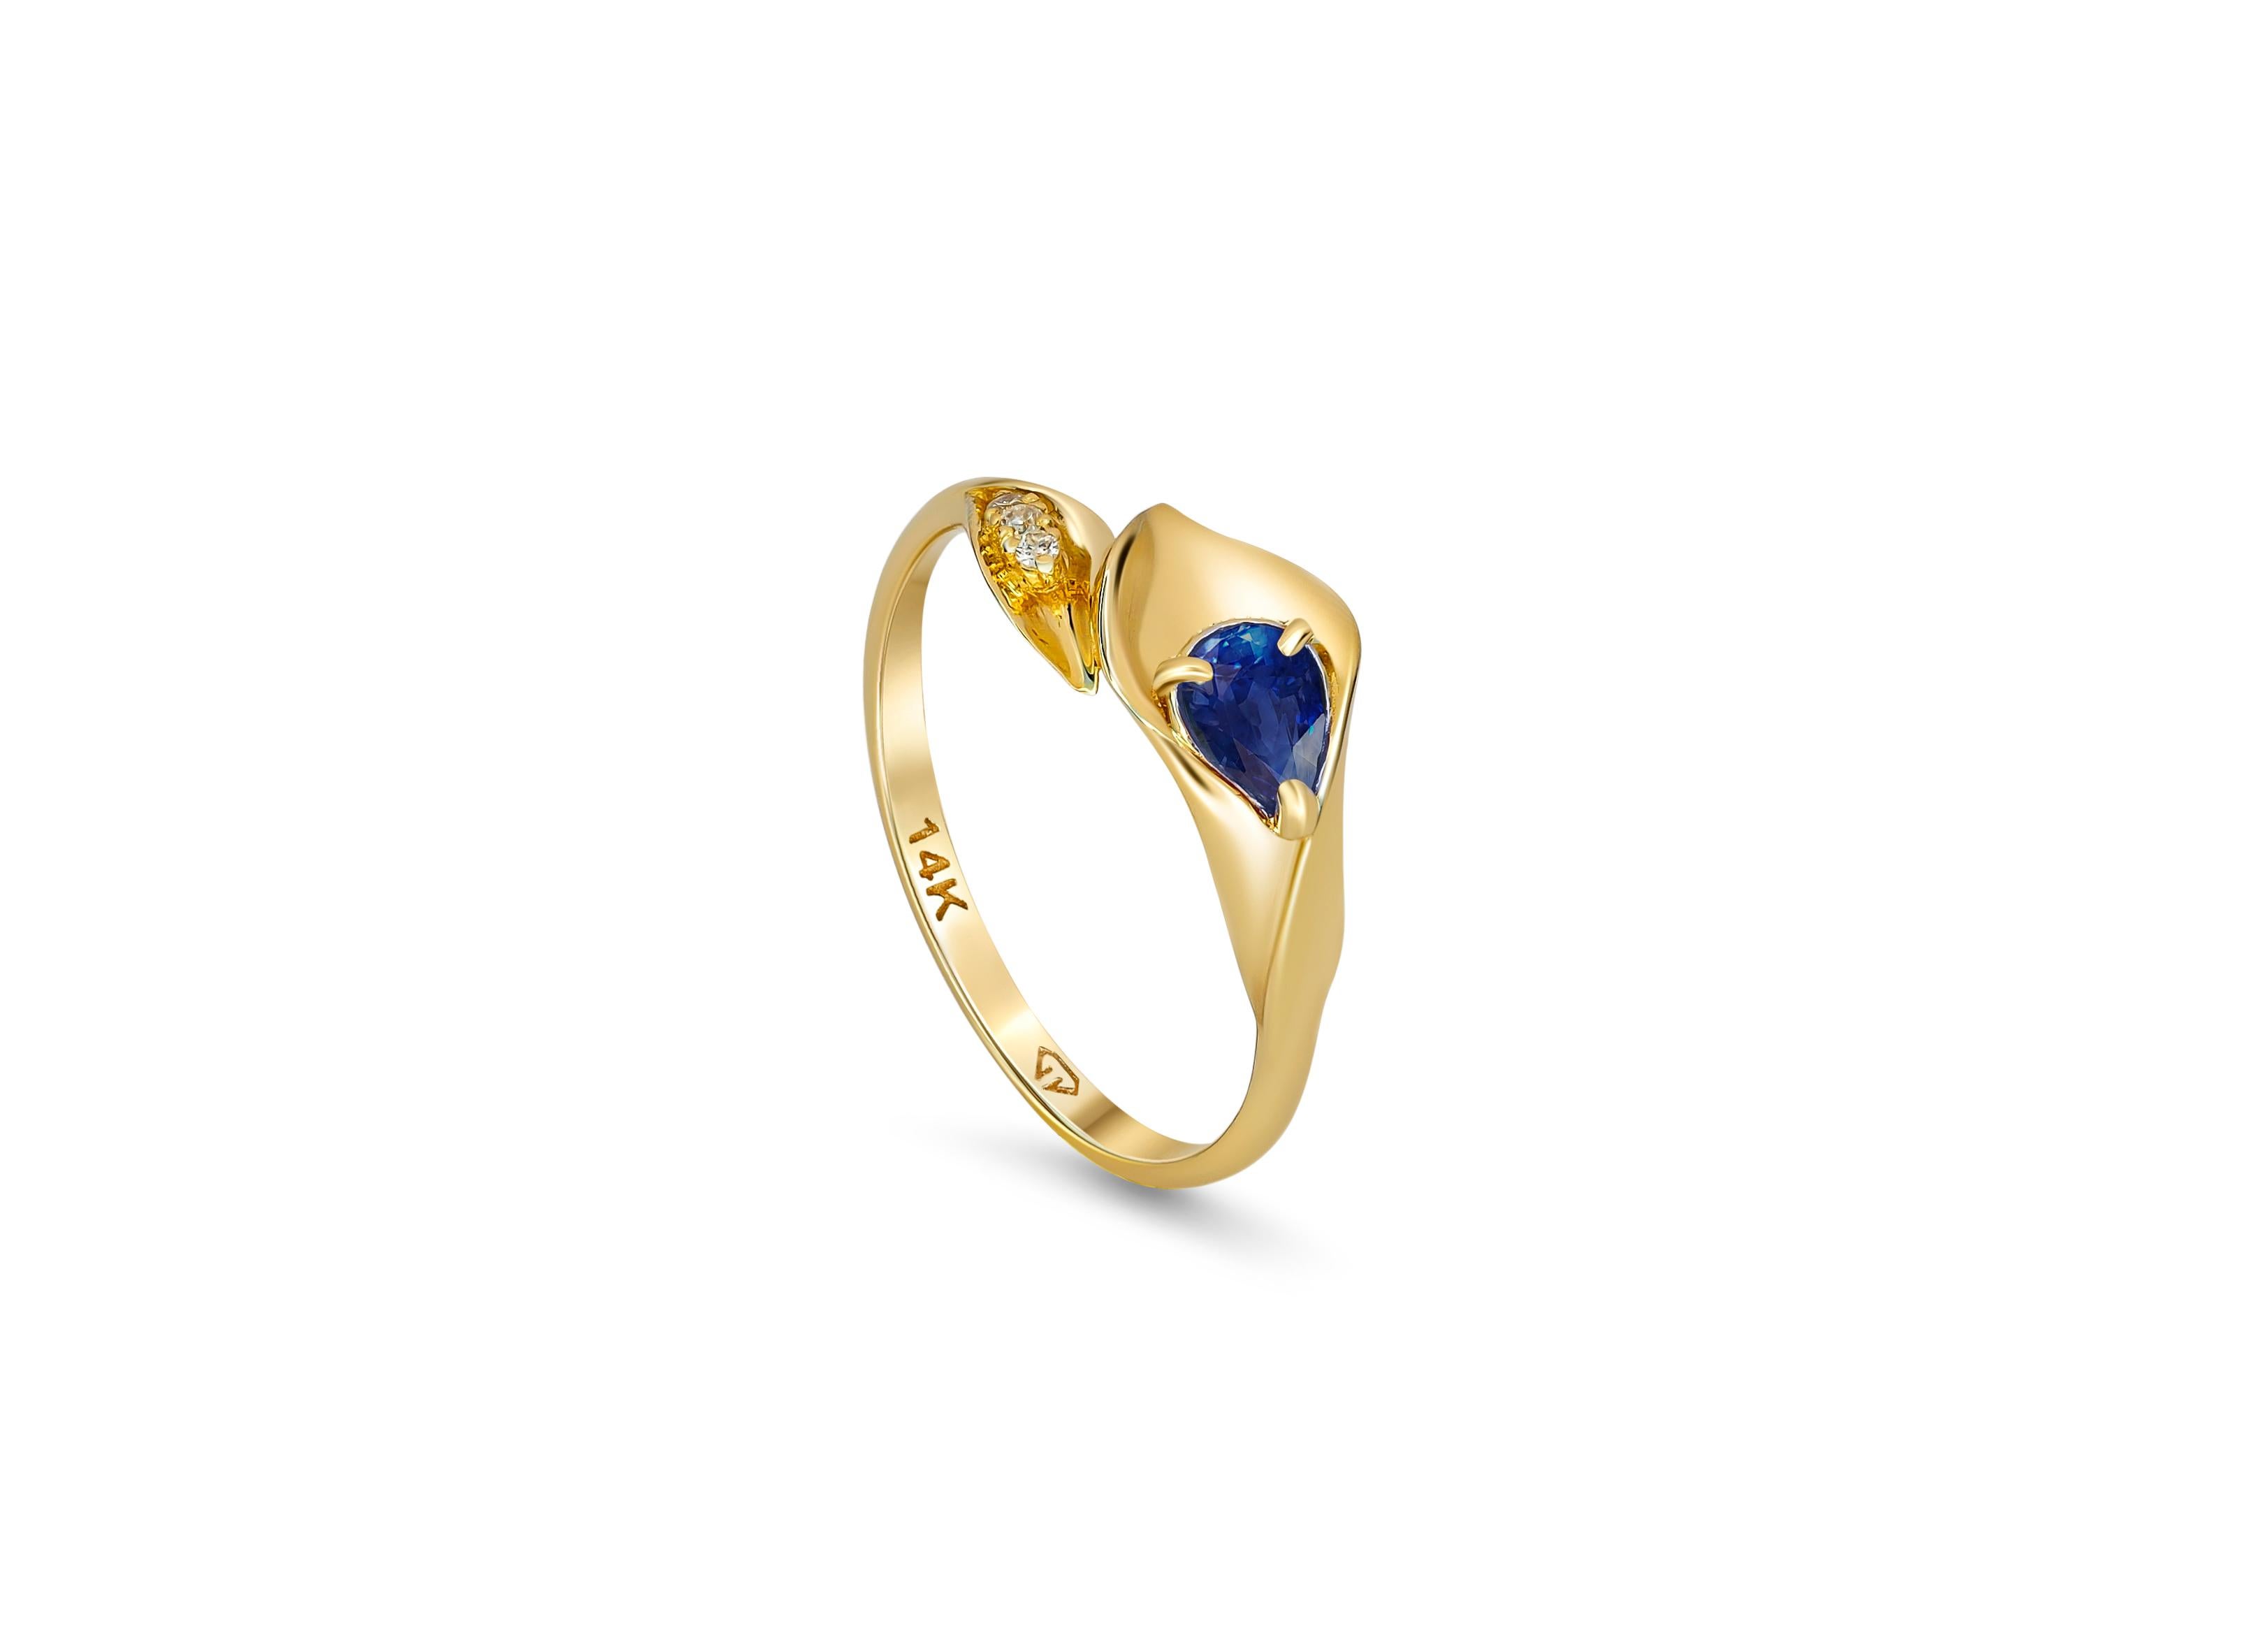 For Sale:  Lily Calla Gold Ring, 14 Karat Gold Ring with Sapphire and Diamonds 5